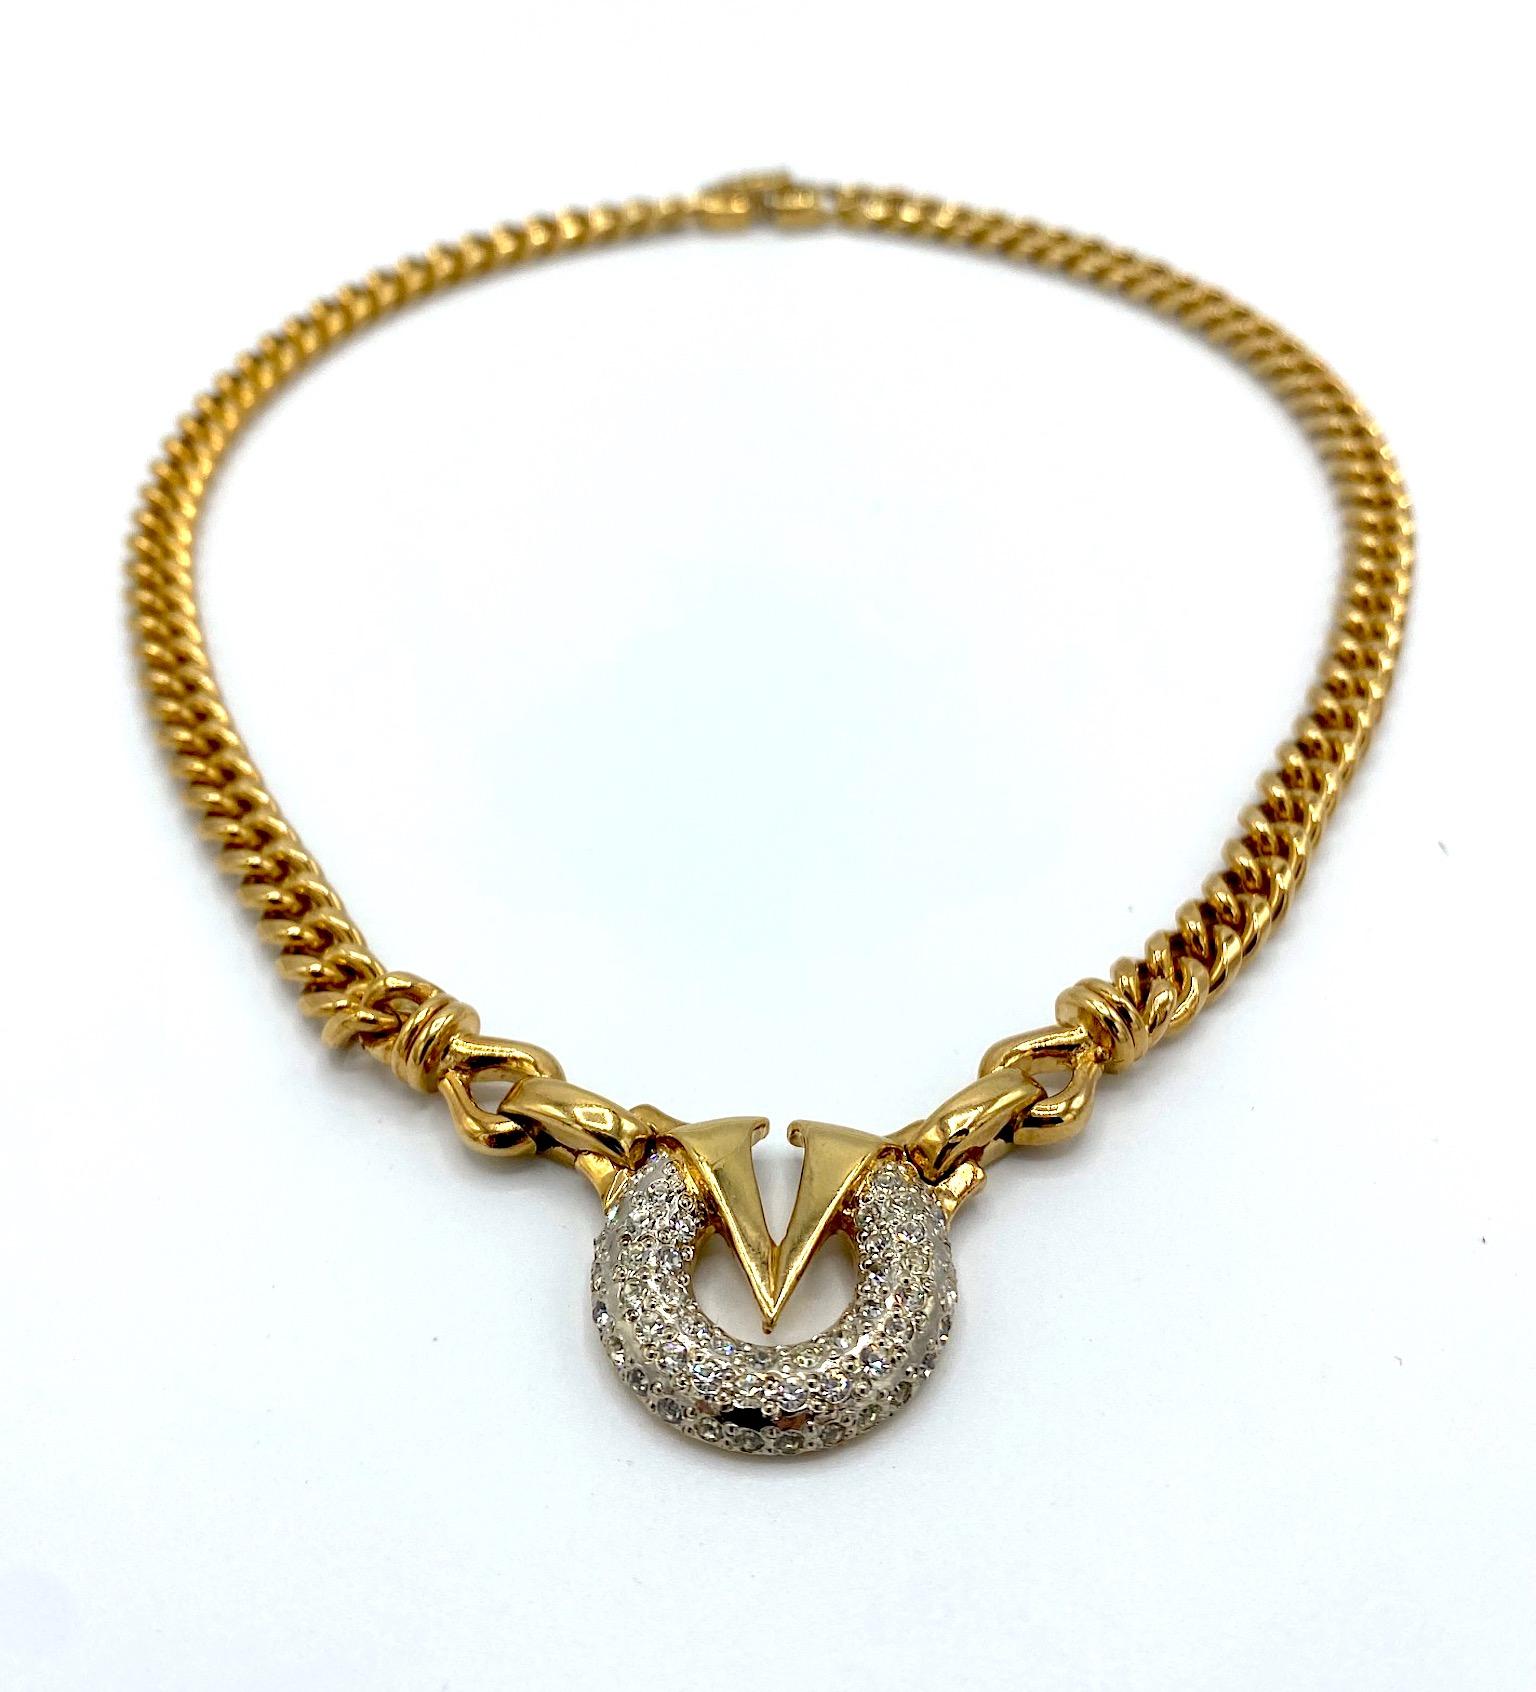 A lovely and versatile 18K gold plate necklace with rhinestone accent from the fashion house of Valentino. The curb link style chain is .25 of an inch wide. The central focal point is the gold V for Valentino inset into the pave' rhinestone set ring